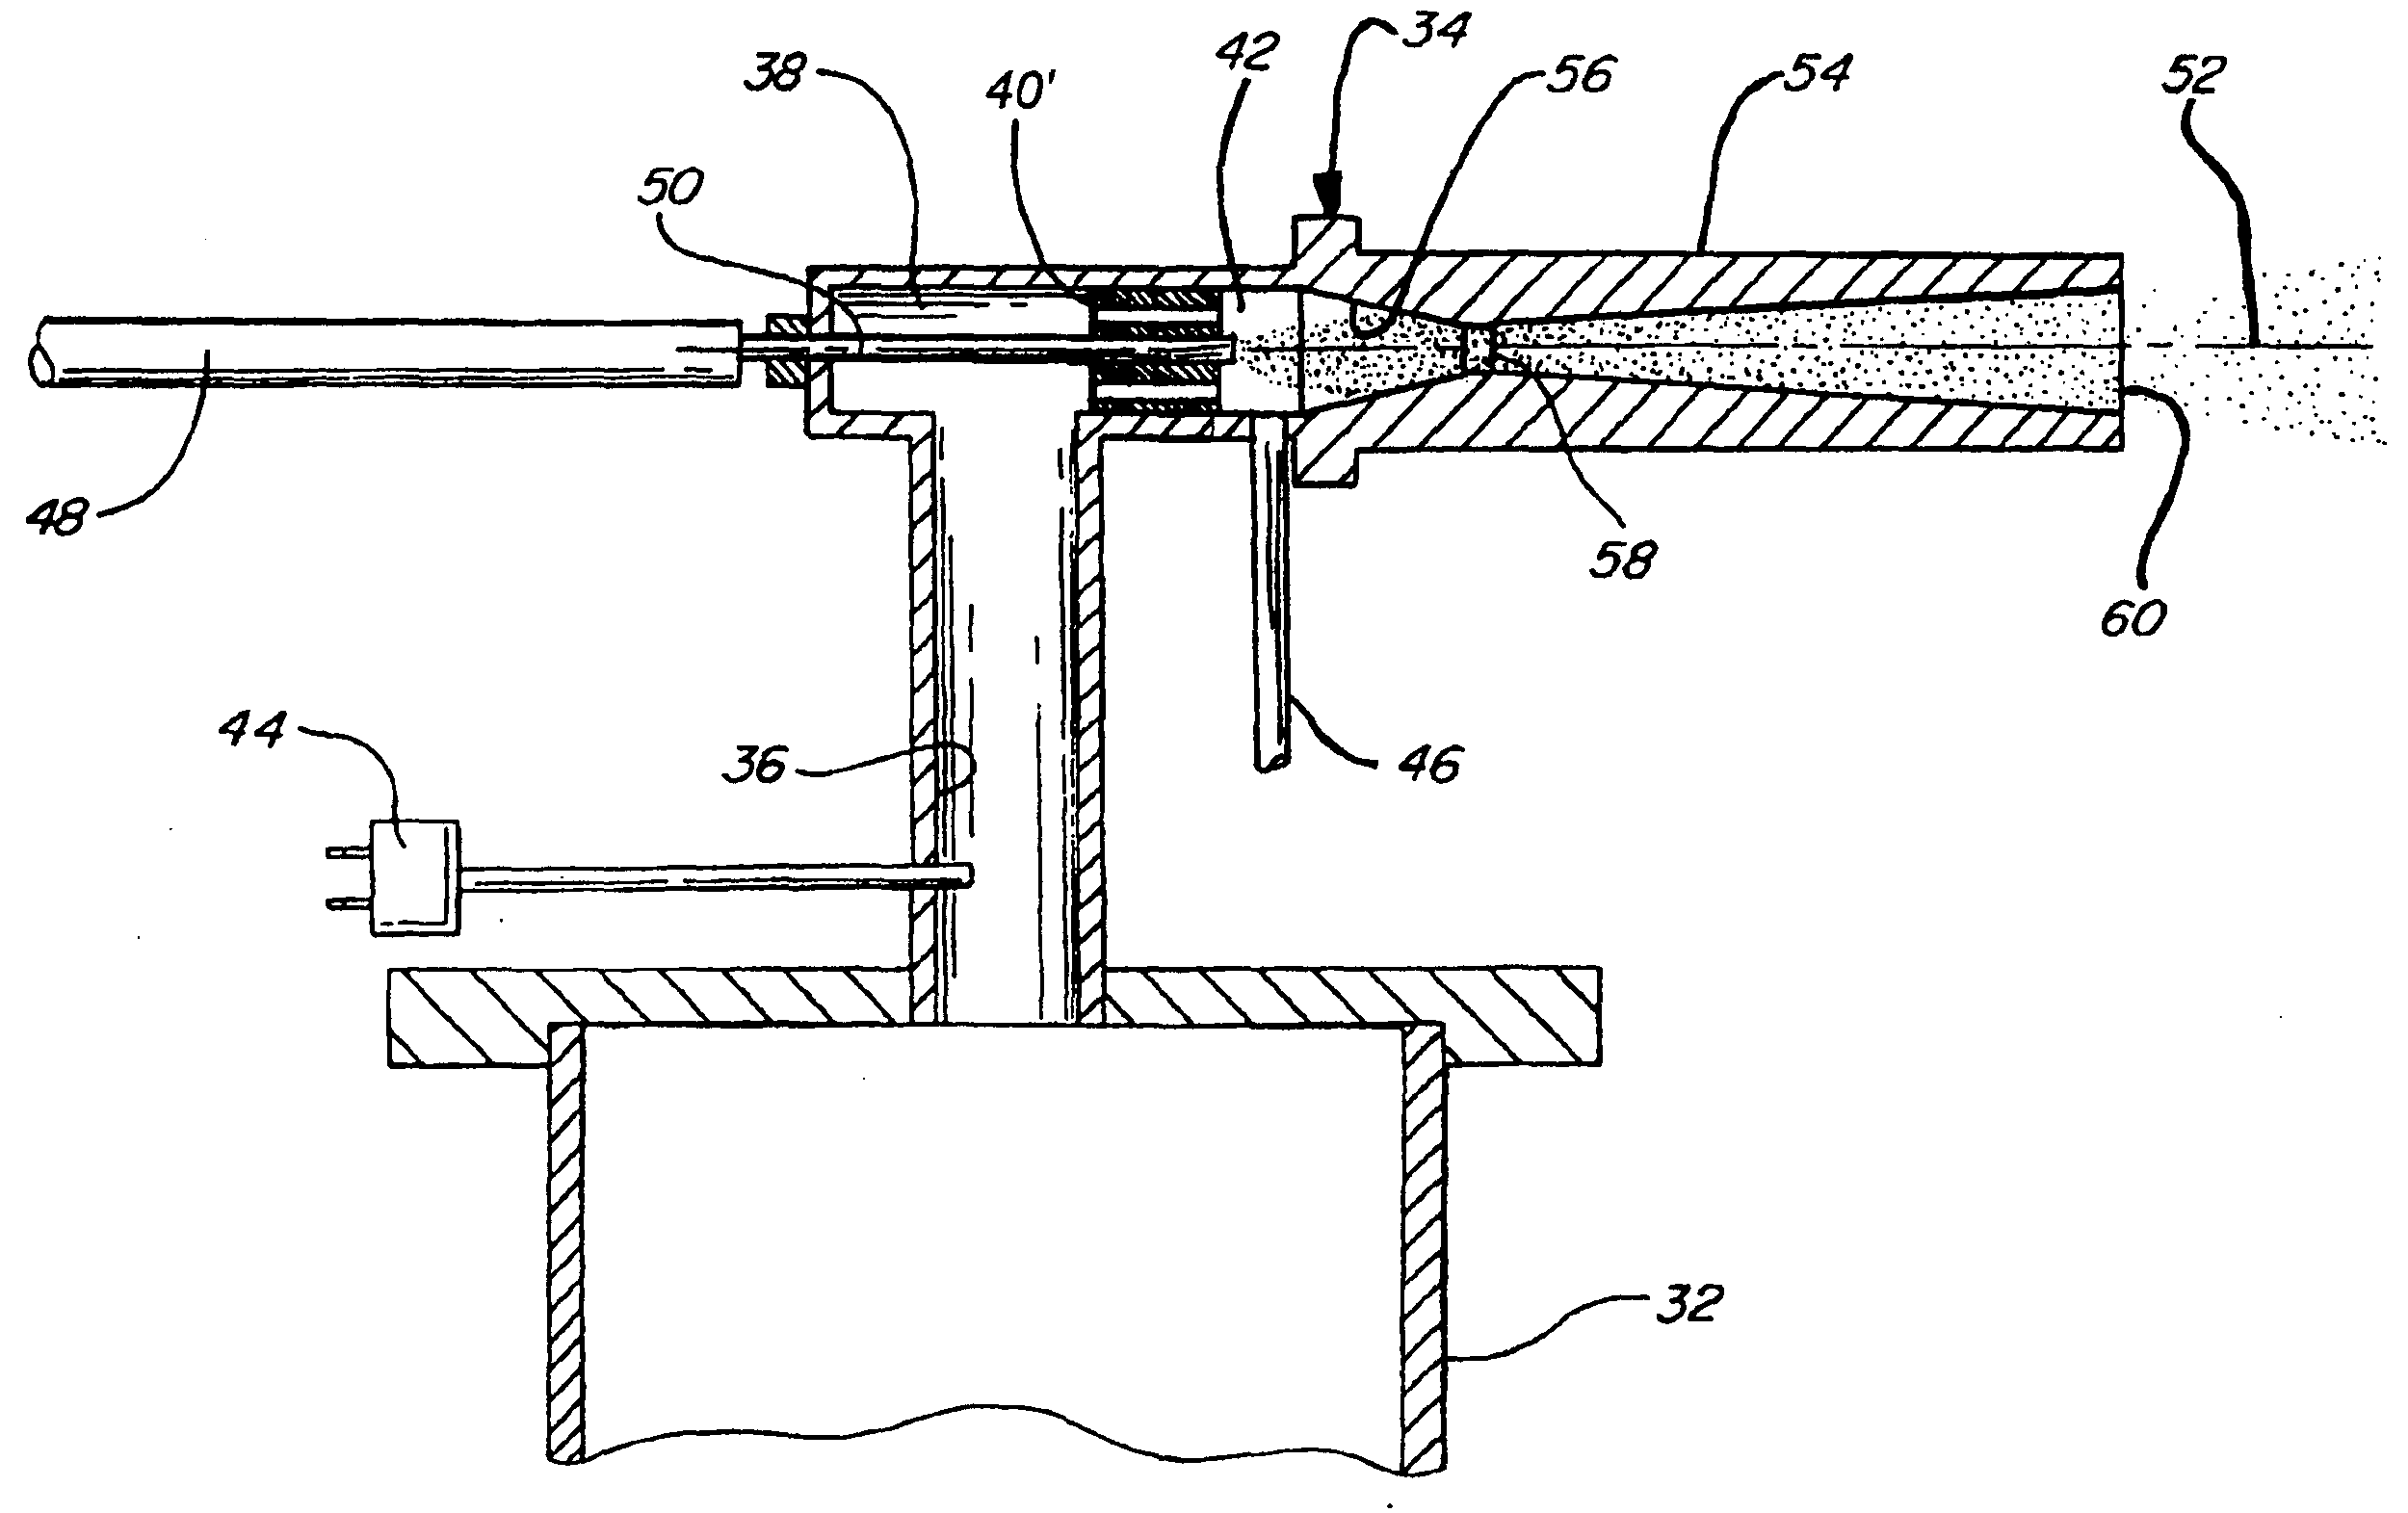 Coaxial low pressure injection method and a gas collimator for a kinetic spray nozzle